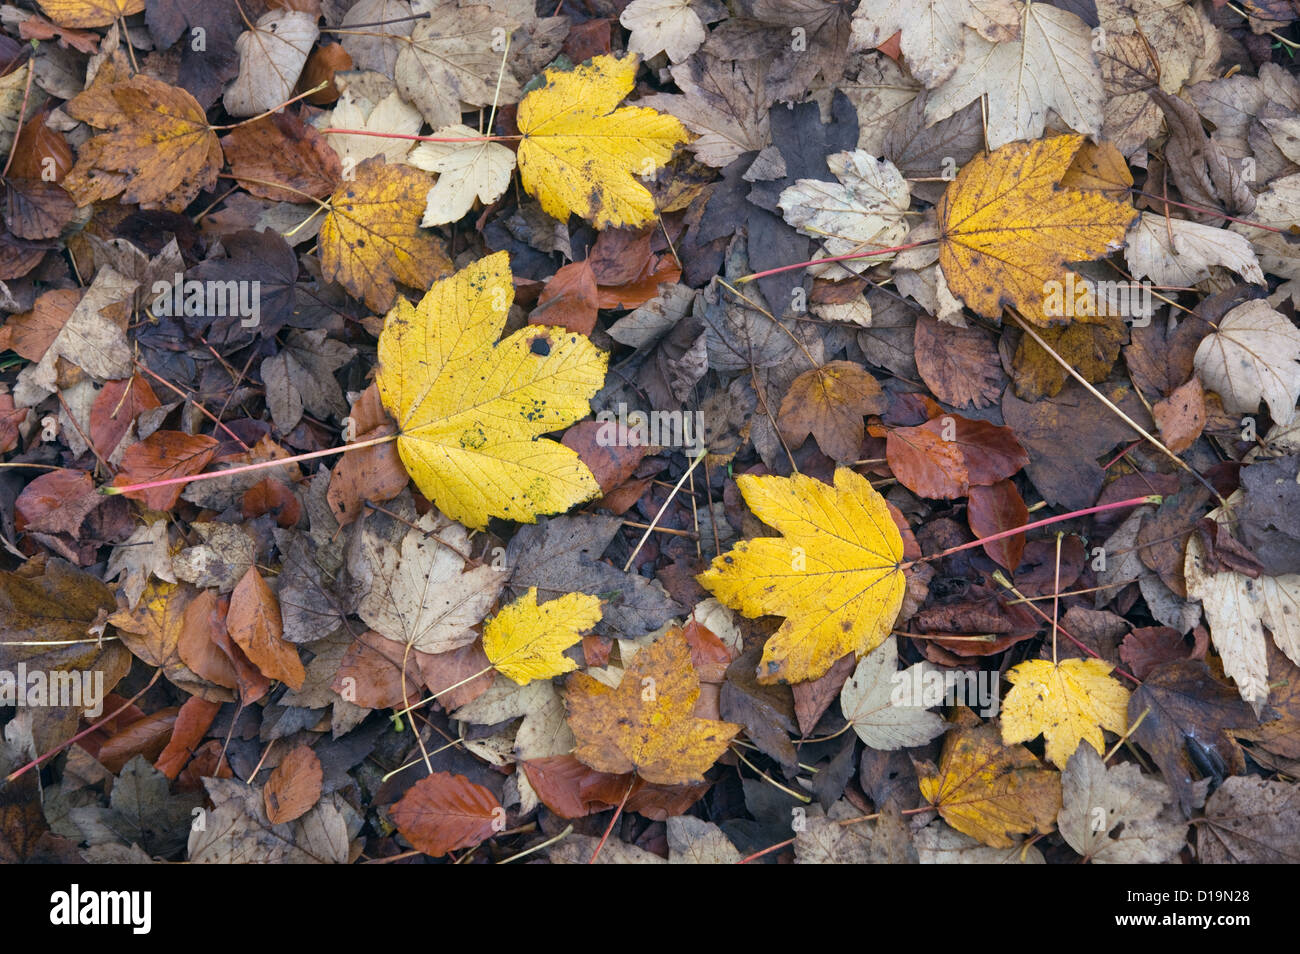 Sycamore Acer pseudoplatanus fallen Leaves Stock Photo